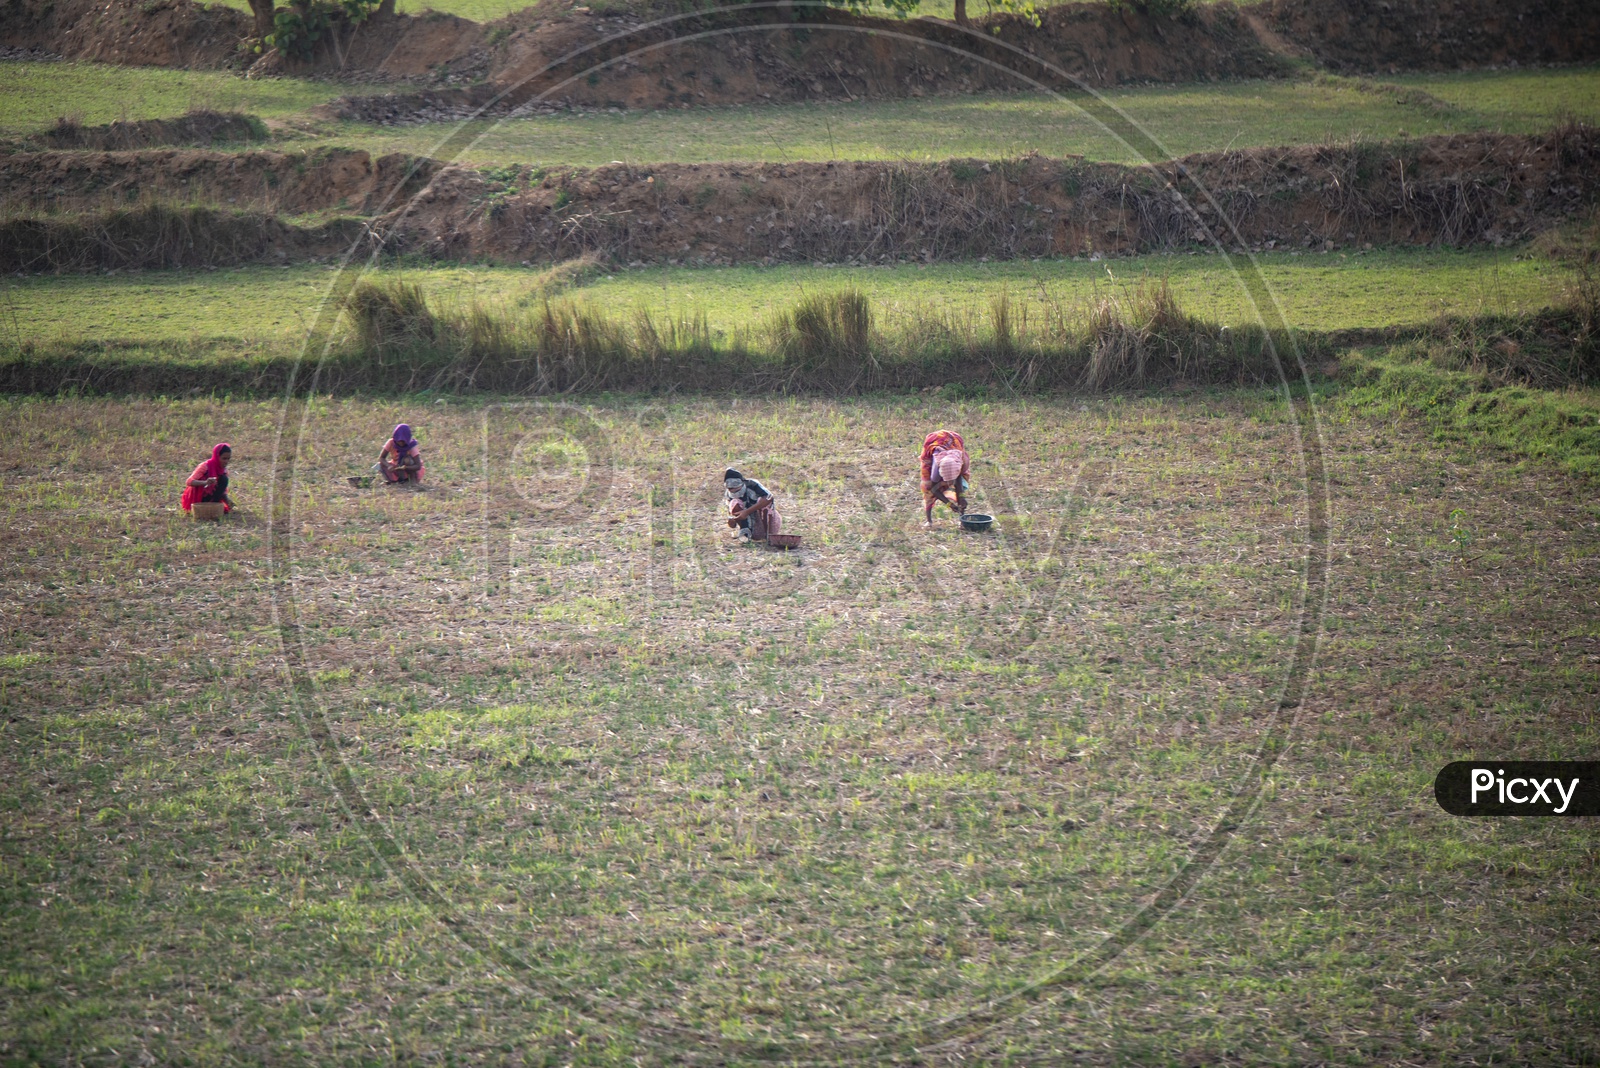 Woman Working in a Agricultural Field